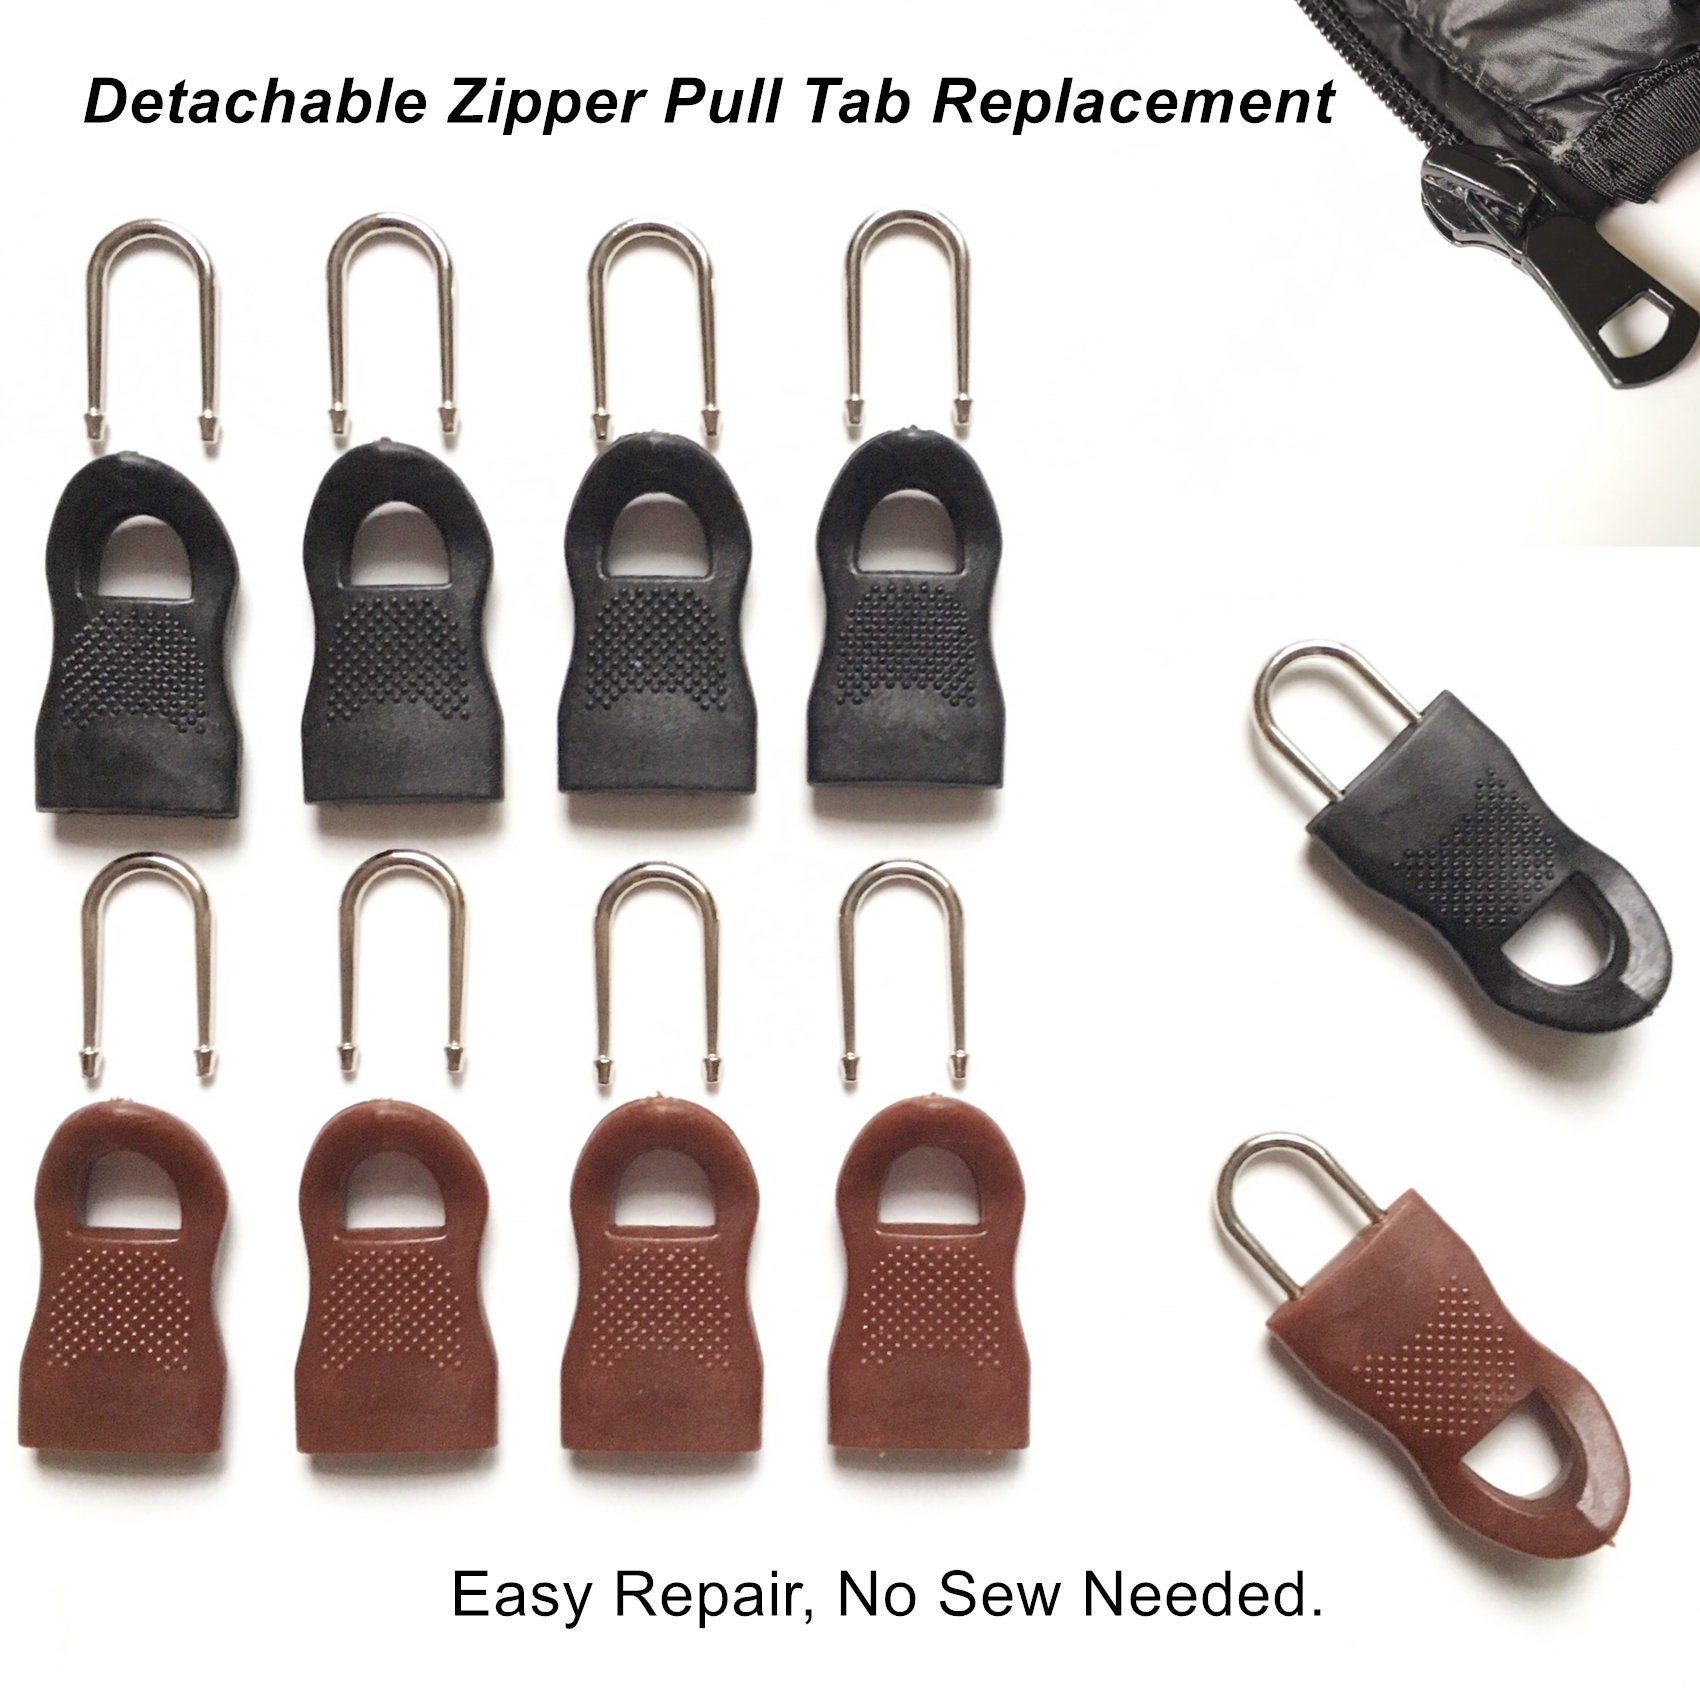 16Pcs Replacement ZIP Zipper Fixer Repair Pull Tap for Pants Luggage Boots  Bags